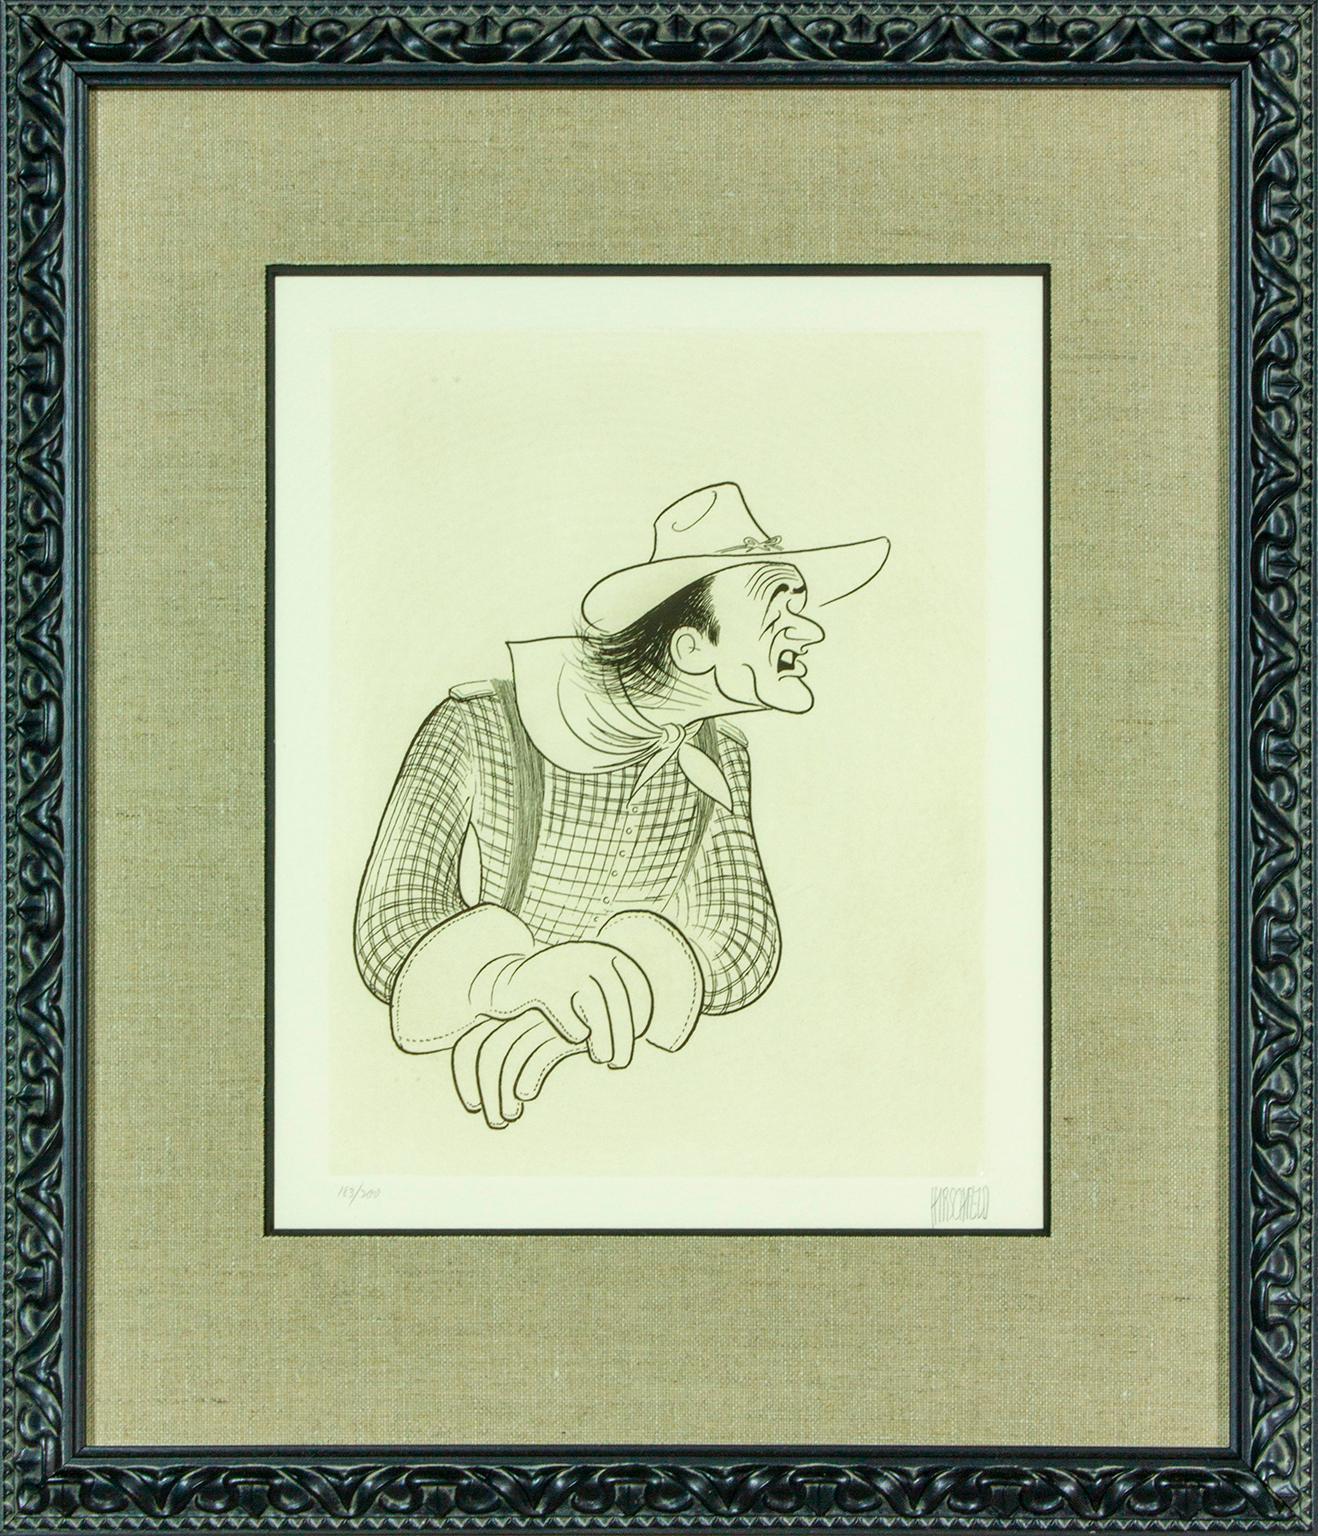 1982 "John Wayne" original etching by Al Hirschfeld. Hand signed and numbered.